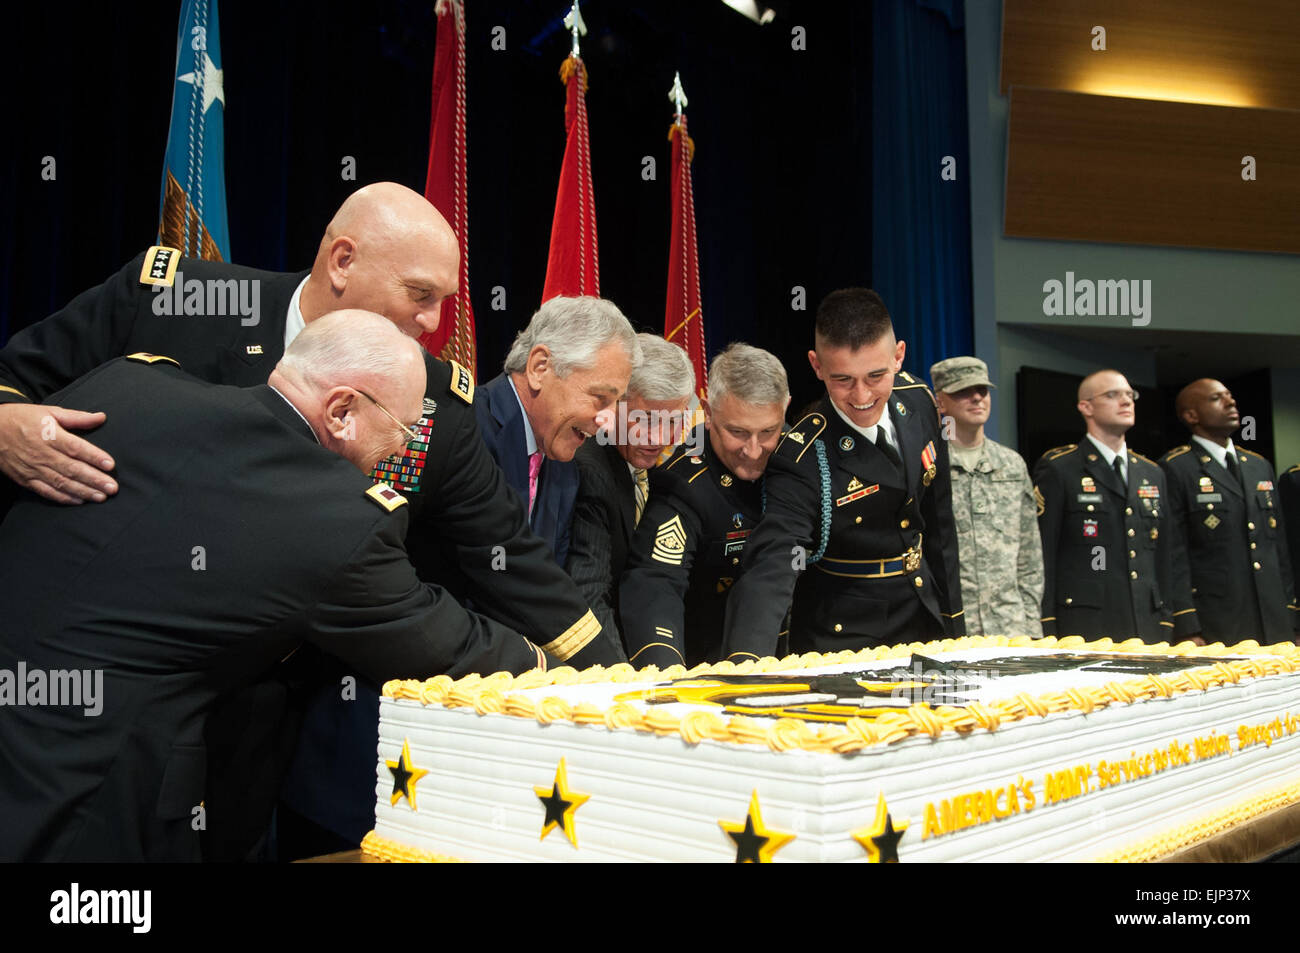 Secretary of Defense Chuck Hagel, Secretary of the Army John McHugh, U.S. Army Chief of Staff Gen. Ray Odierno,  Sergeant Major of the Army Sgt. Maj. Raymond F. Chandler III, the oldest and youngest Soldiers in the audience cut a cake during a ceremony celebrating the Army's 238th Birthday at the Pentagon June 13, 2013.  Staff Sgt. Teddy Wade Stock Photo